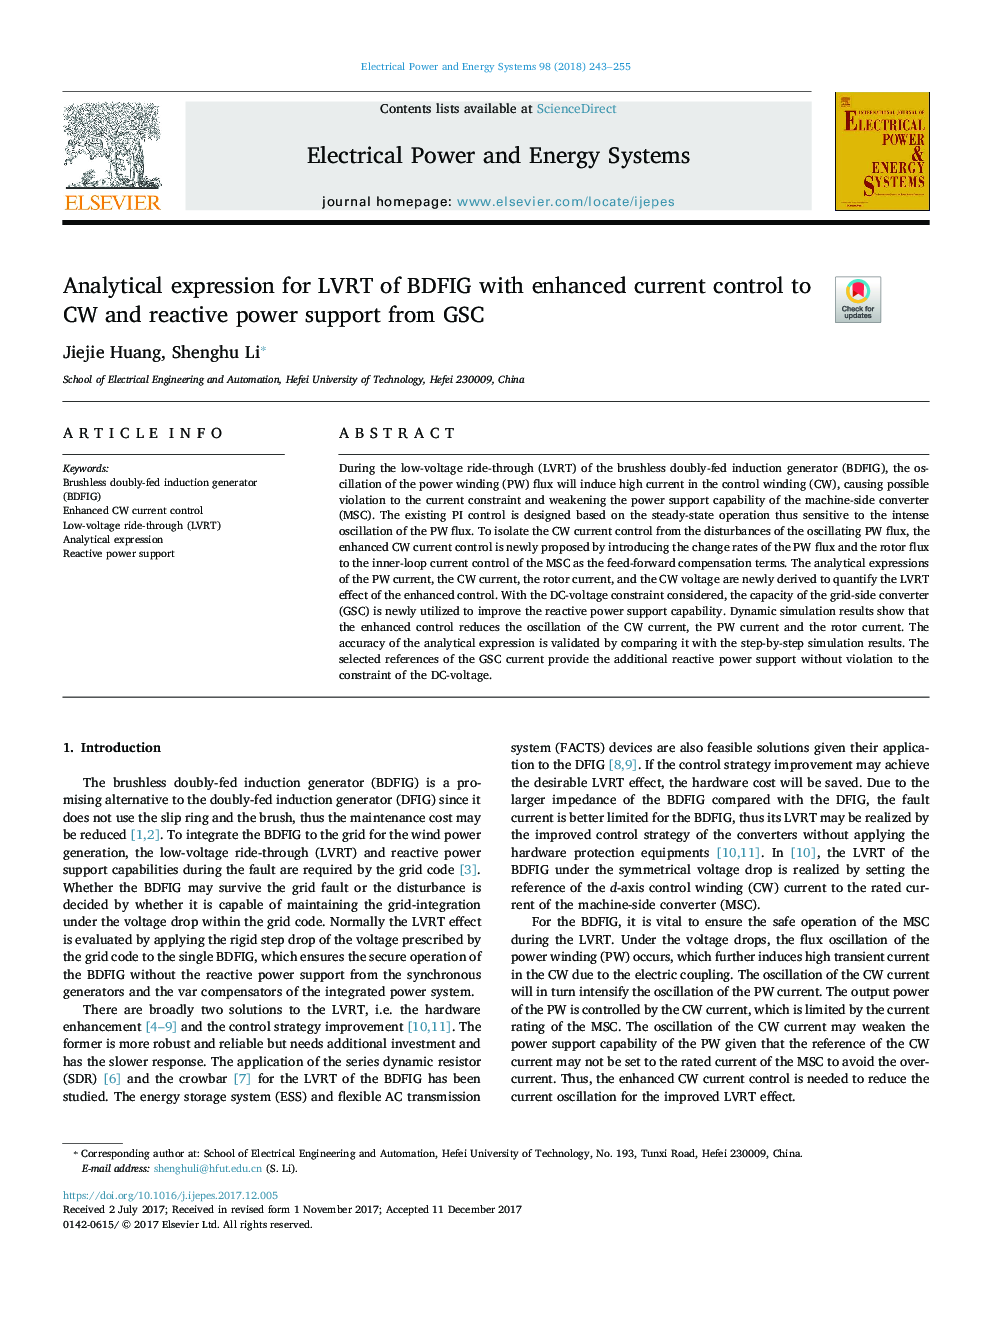 Analytical expression for LVRT of BDFIG with enhanced current control to CW and reactive power support from GSC